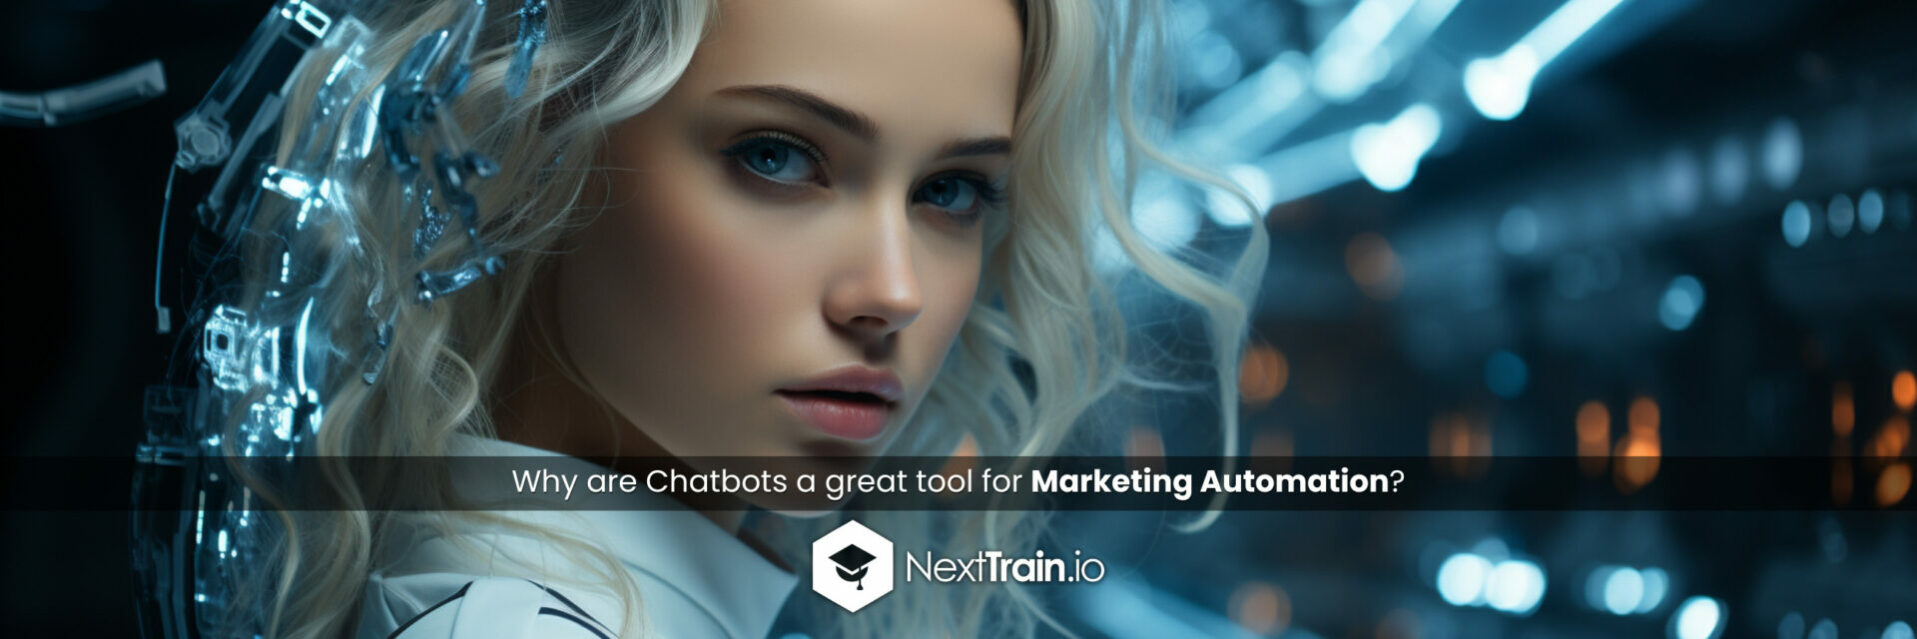 Why are Chatbots a great tool for Marketing Automation?